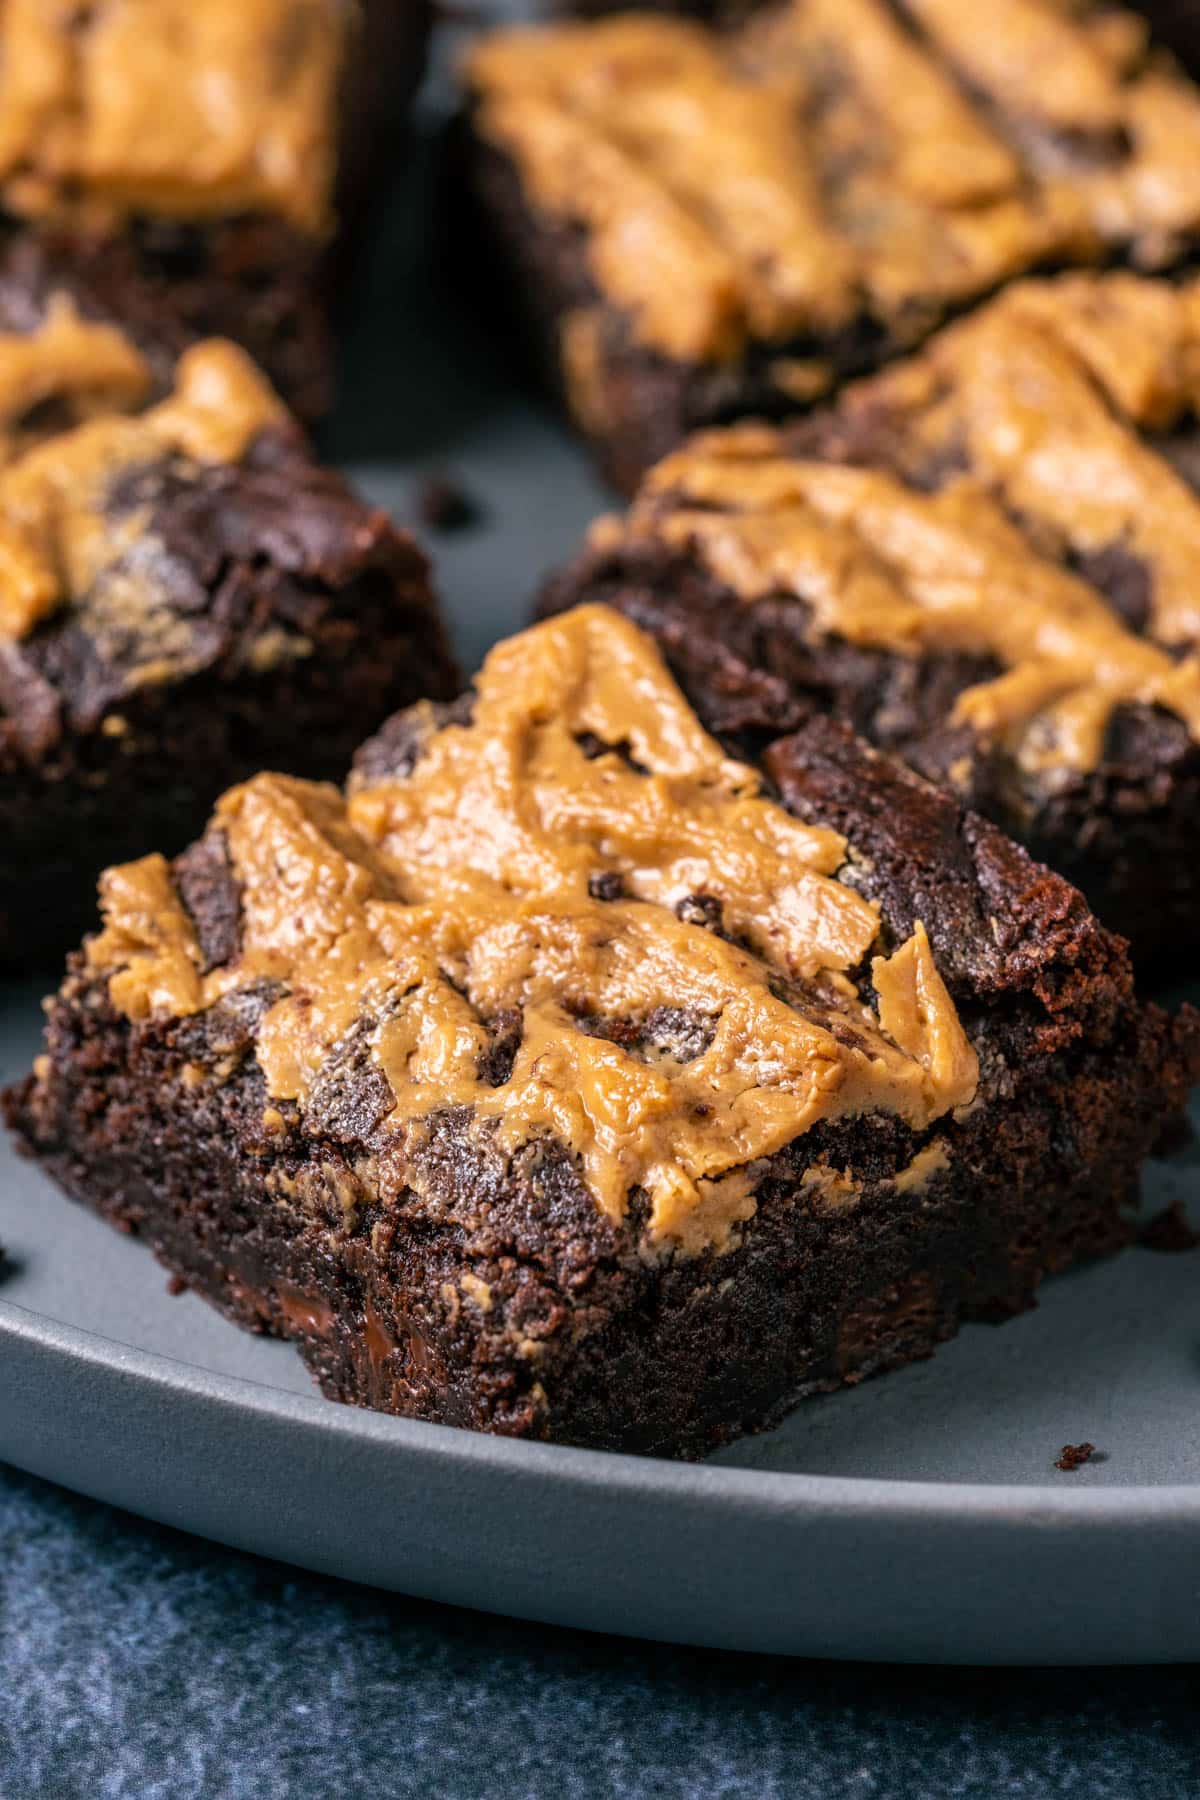 Peanut butter swirl brownies on a gray plate.